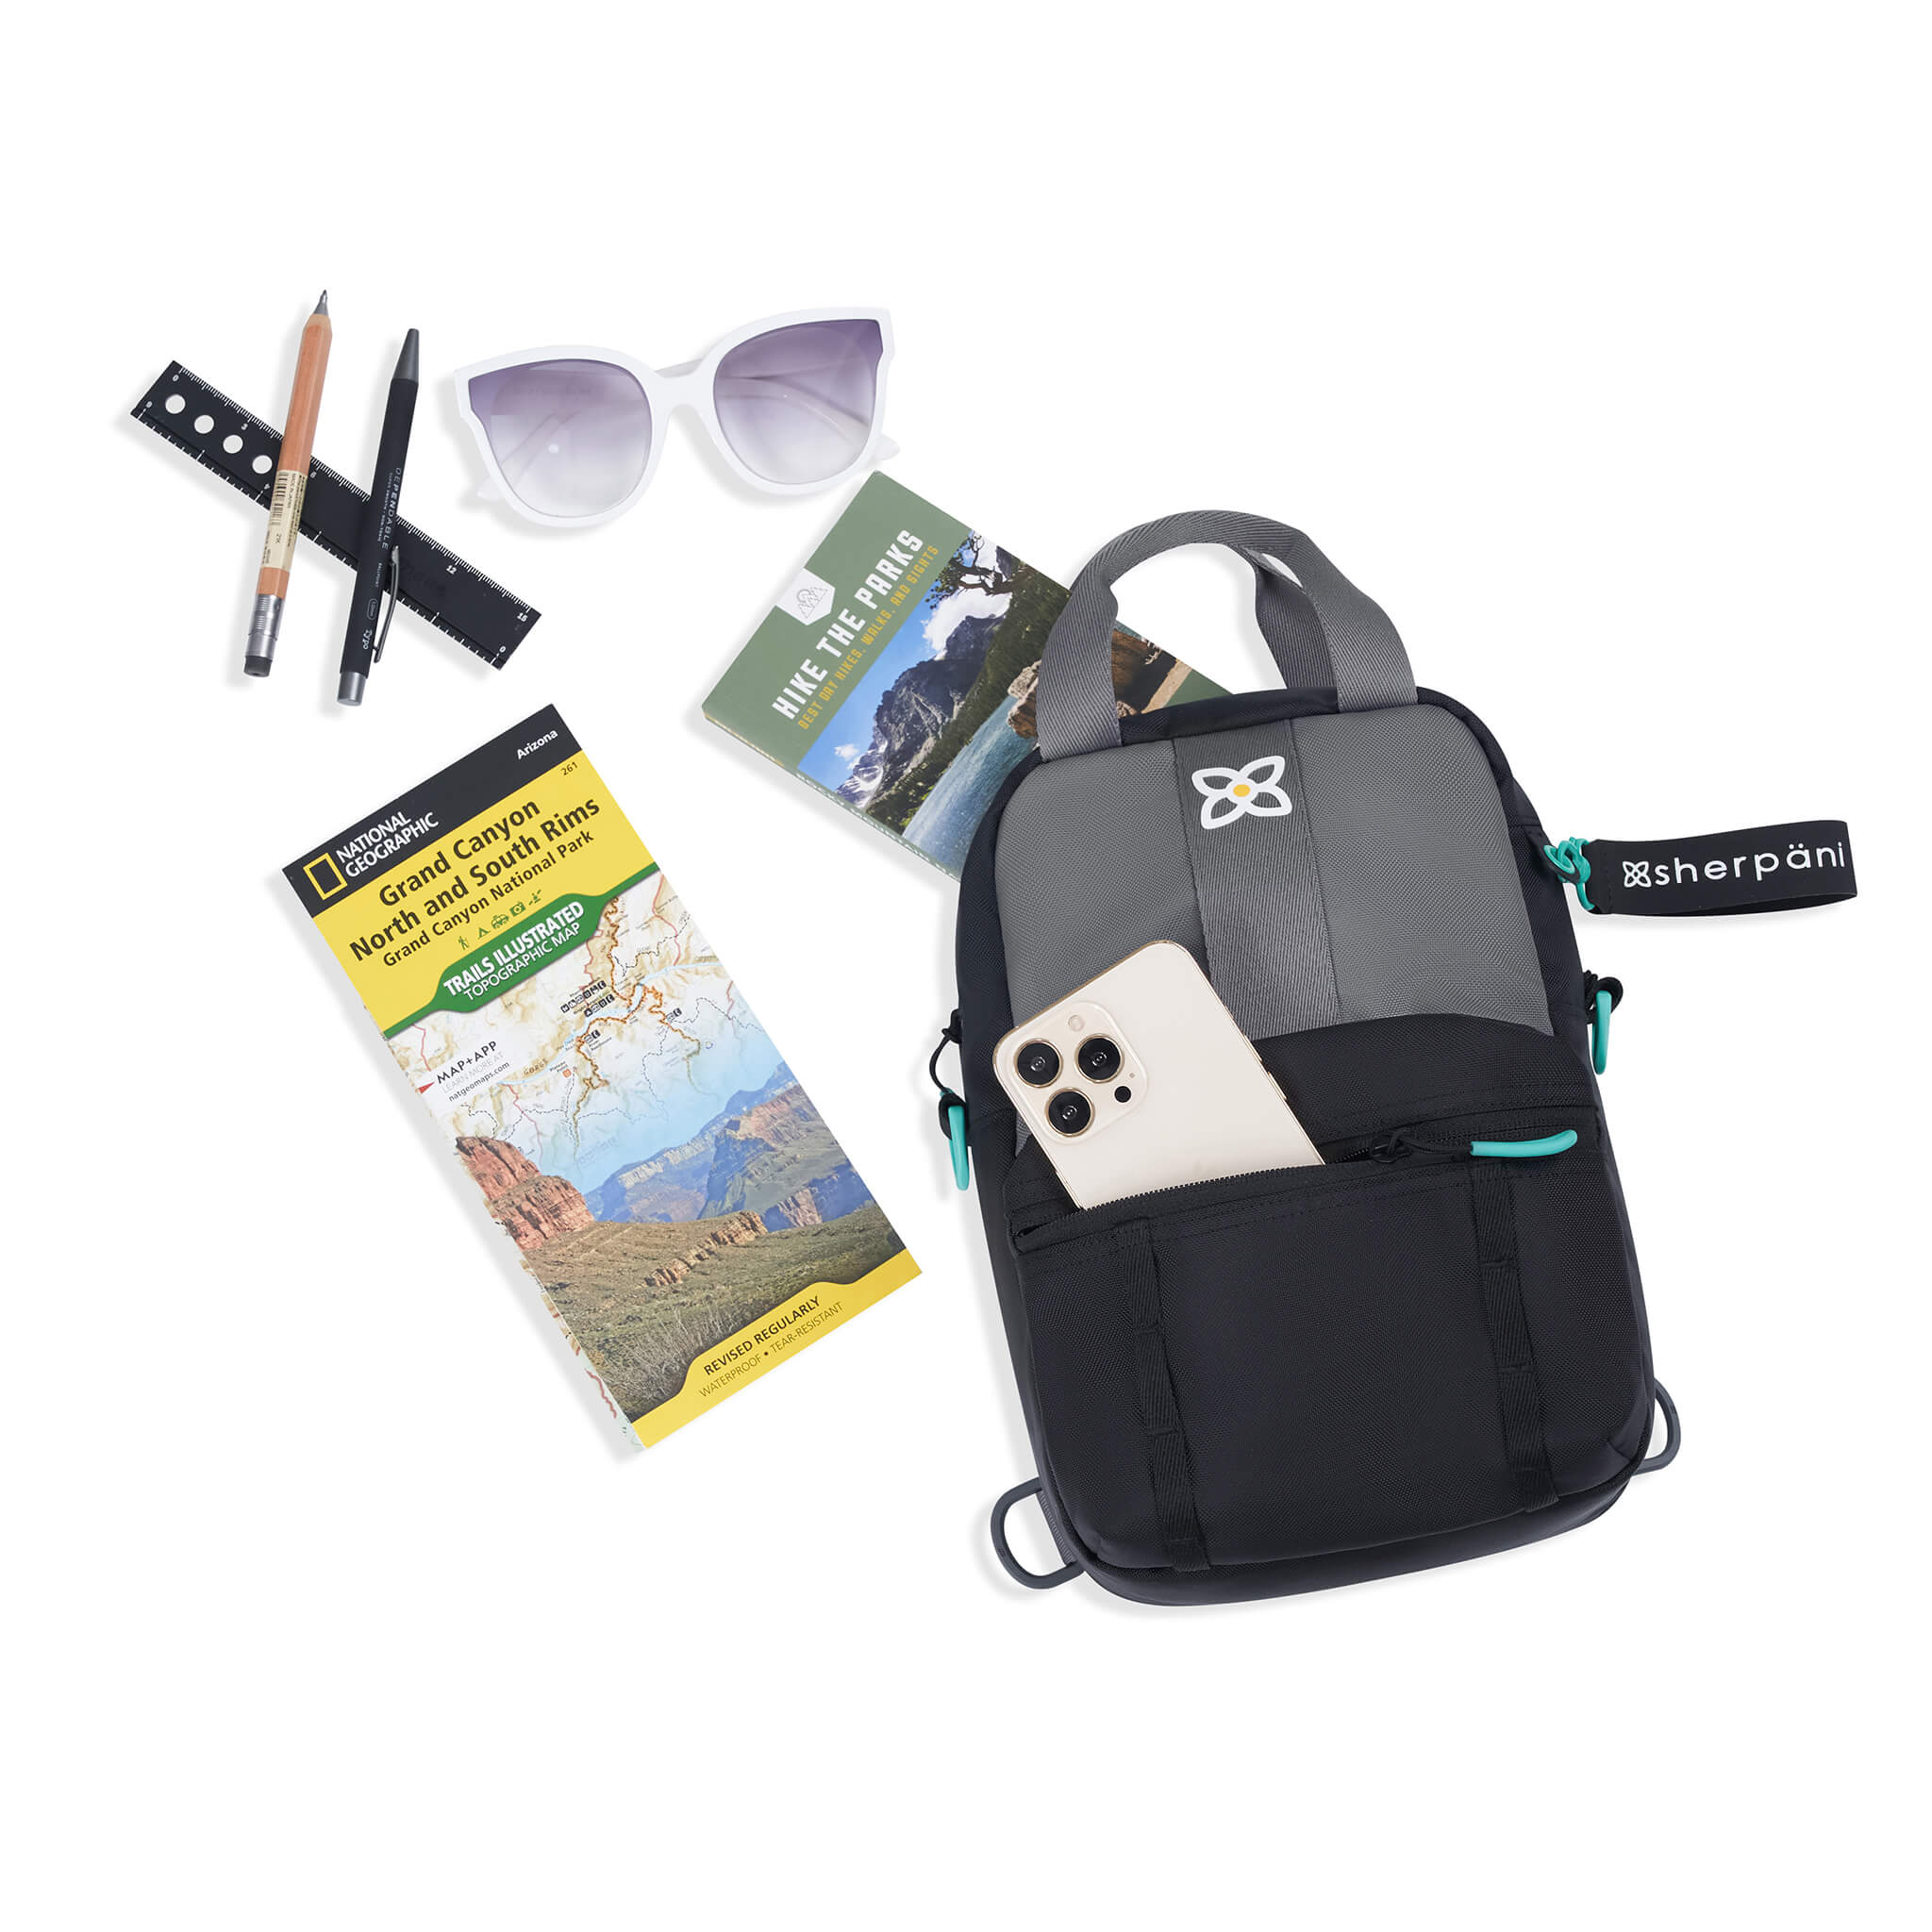  Top view of example items to fill the bag. Sherpani Logan mini backpack in Moonstone lies next to the following items: pencils, ruler, sunglasses, hiking guide, park map and phone.